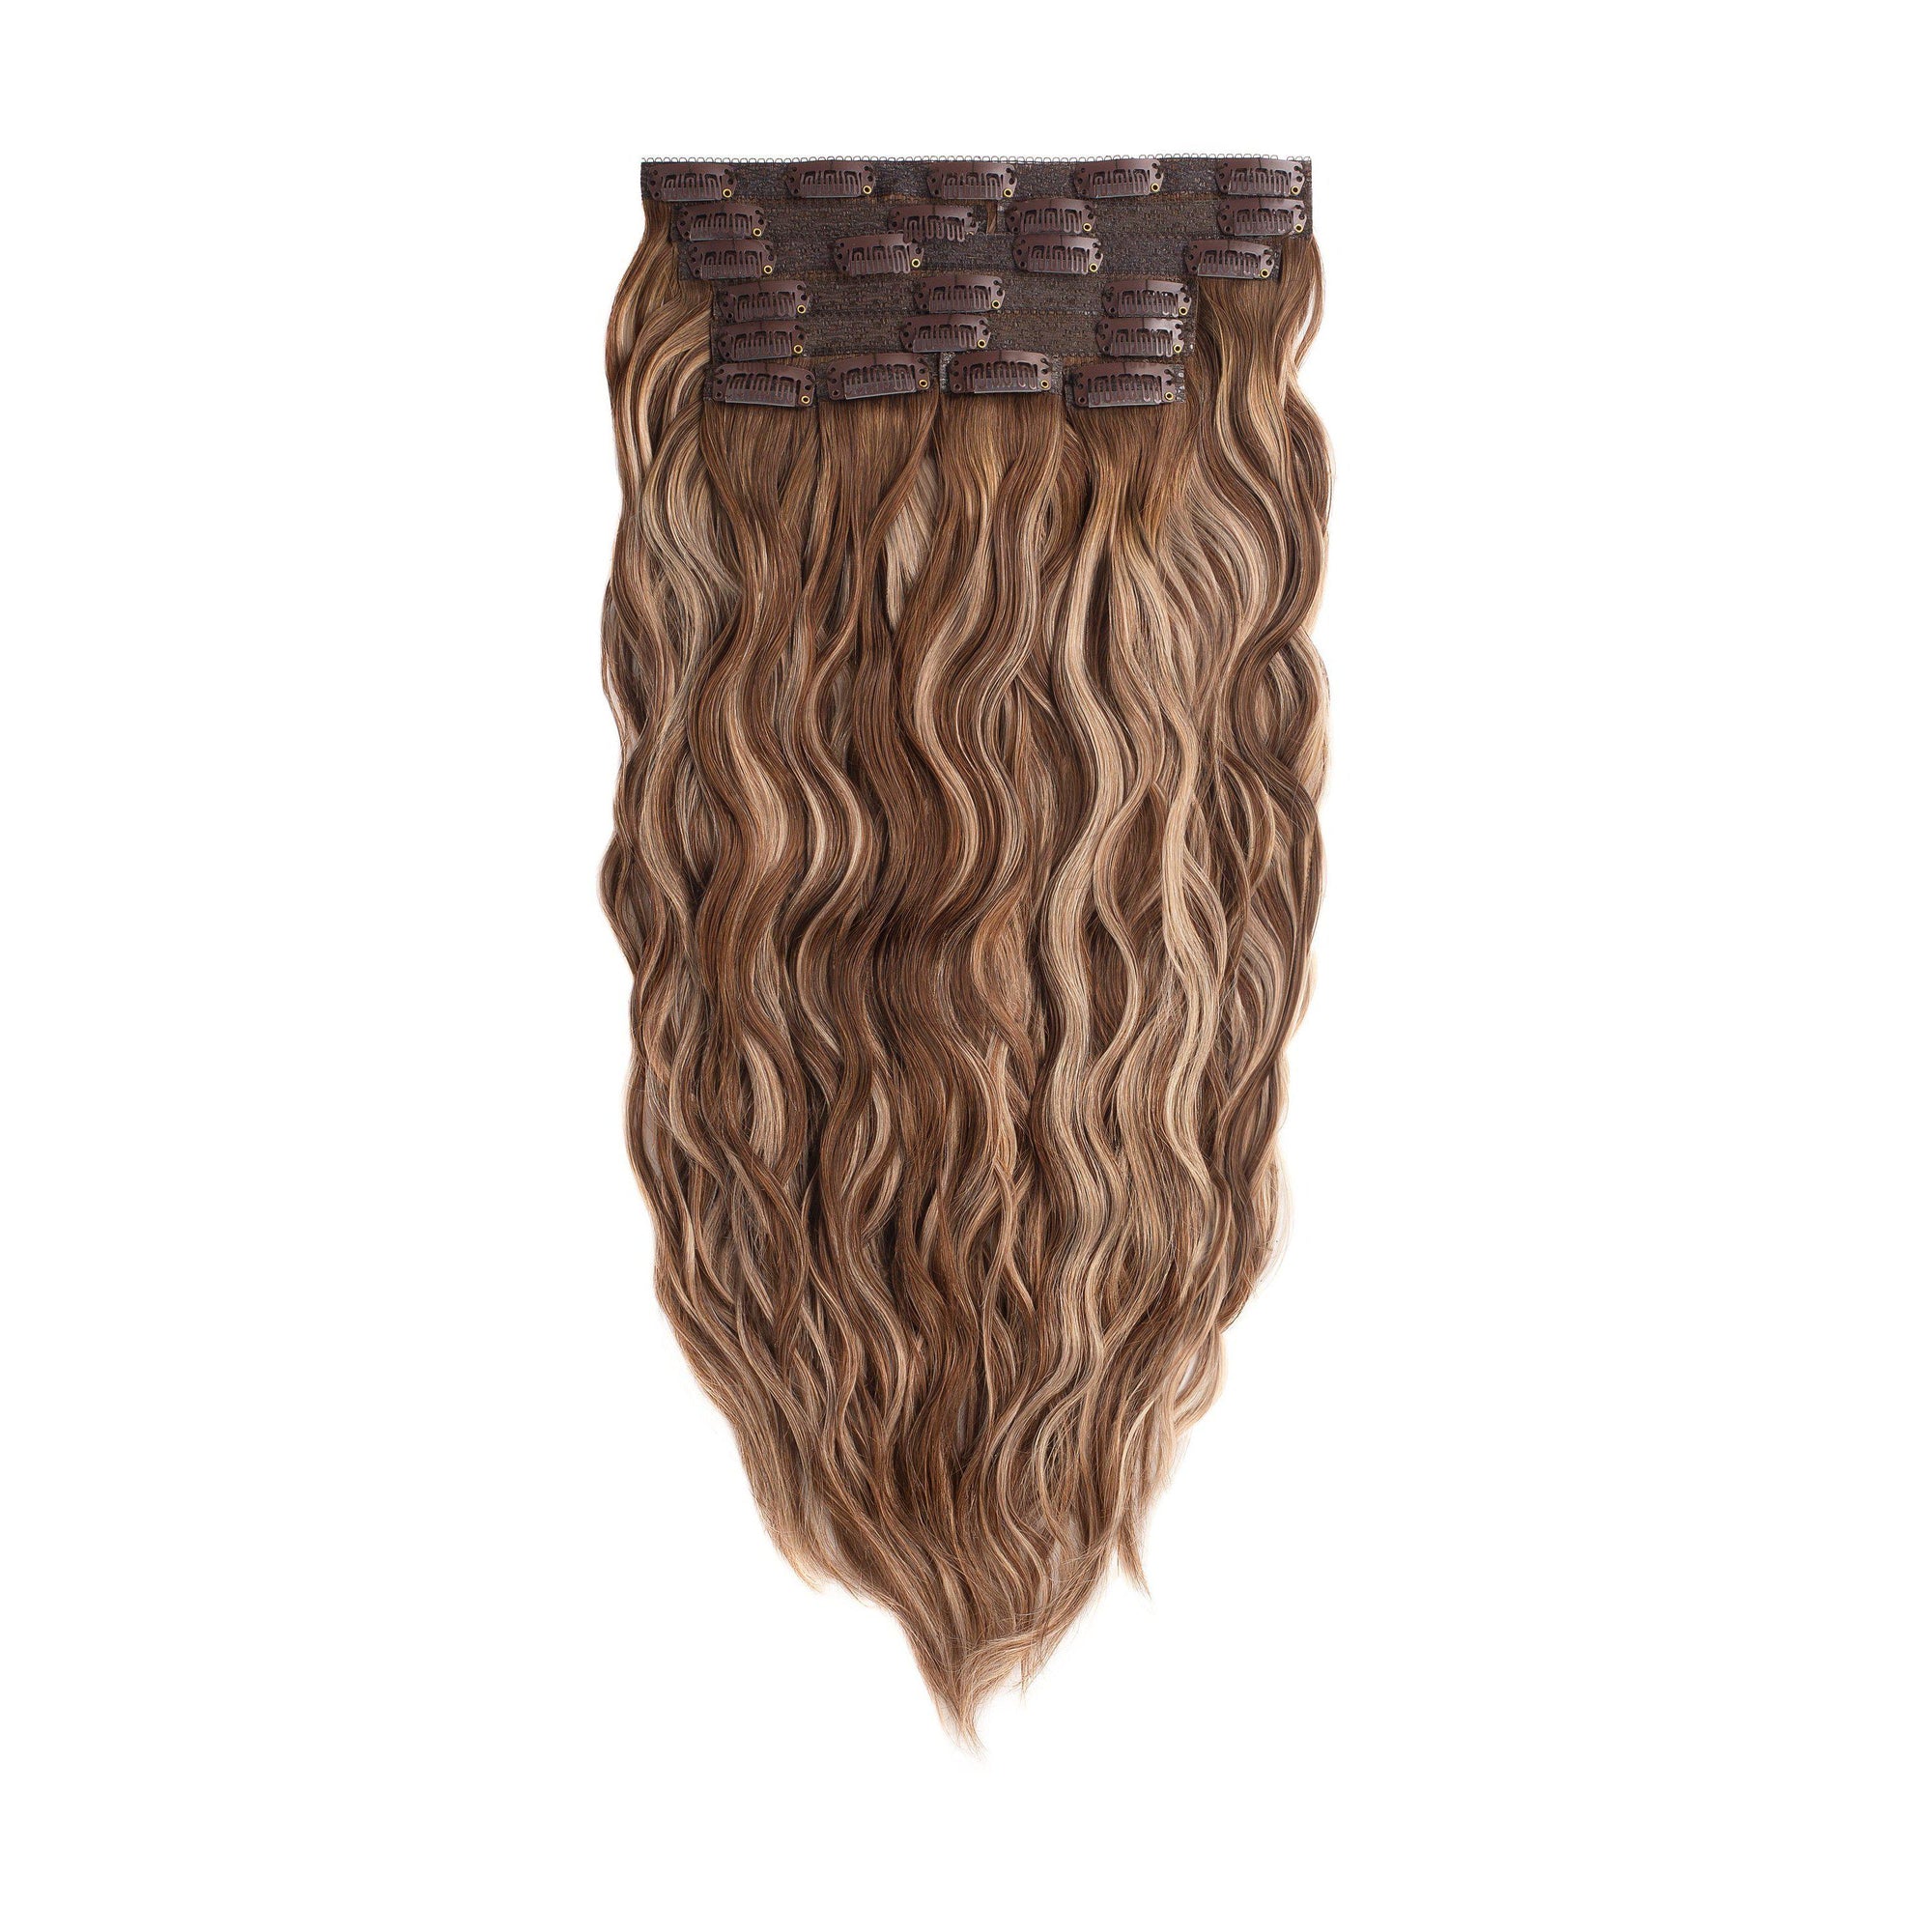 Glam Seamless Beach Wave Invisi Clip Rooted Caramelt Highlights - RH3/12